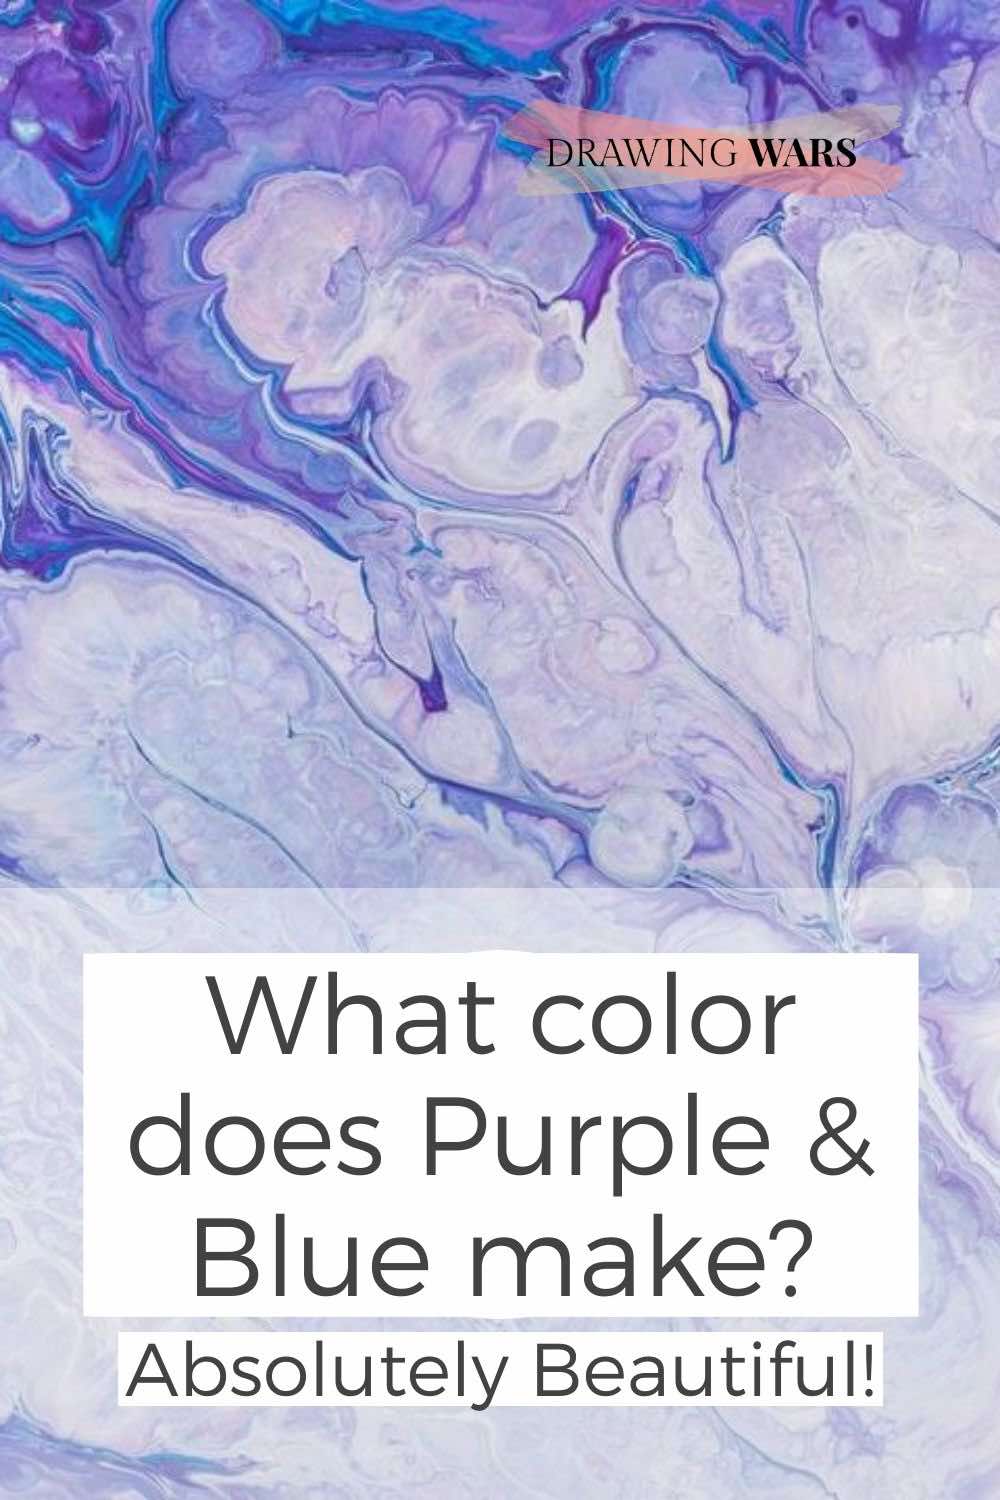 What color does Purple & Blue make? Absolutely Beautiful! Thumbnail